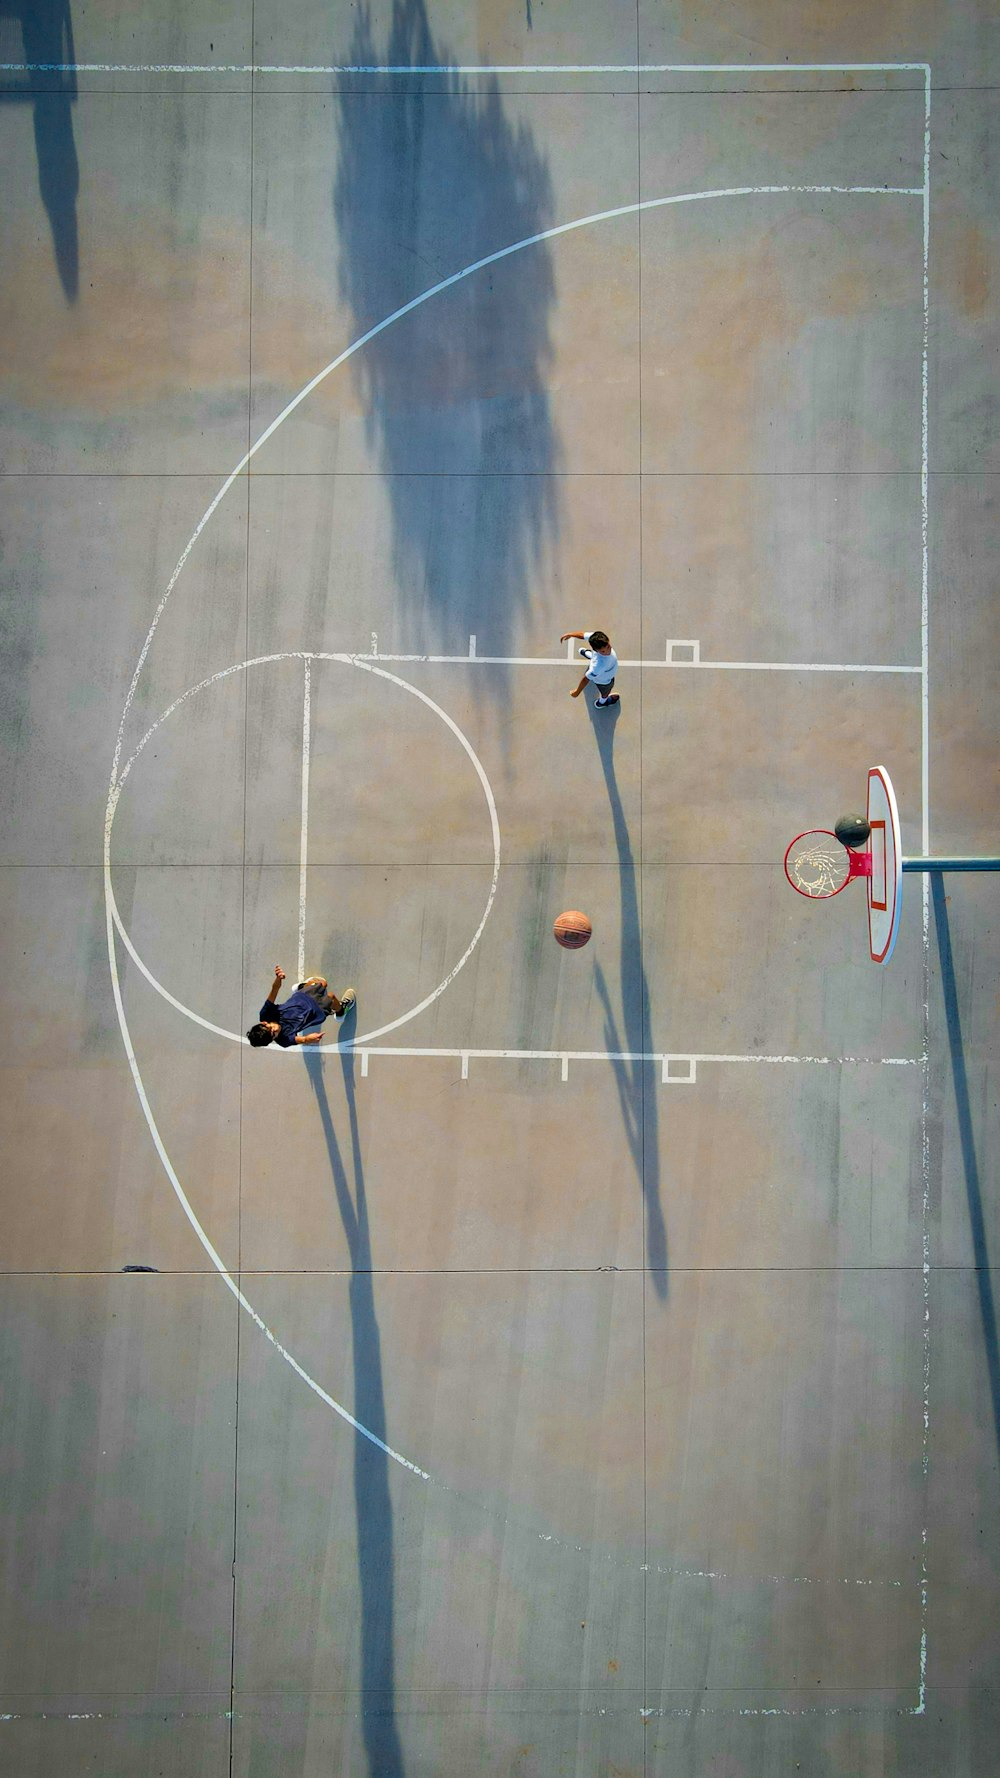 two people playing basketball on a basketball court